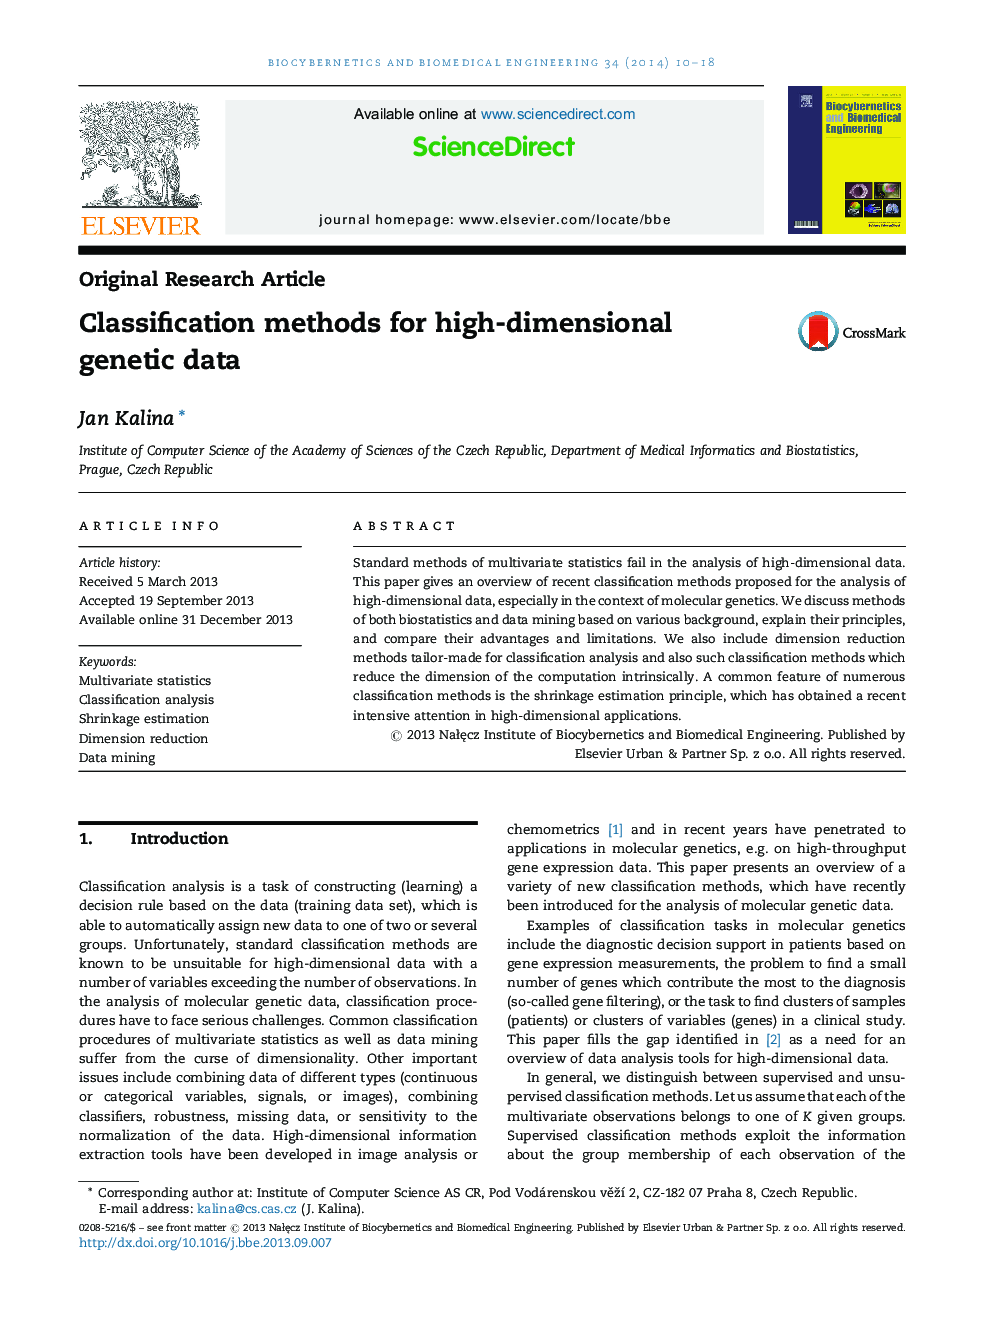 Classification methods for high-dimensional genetic data